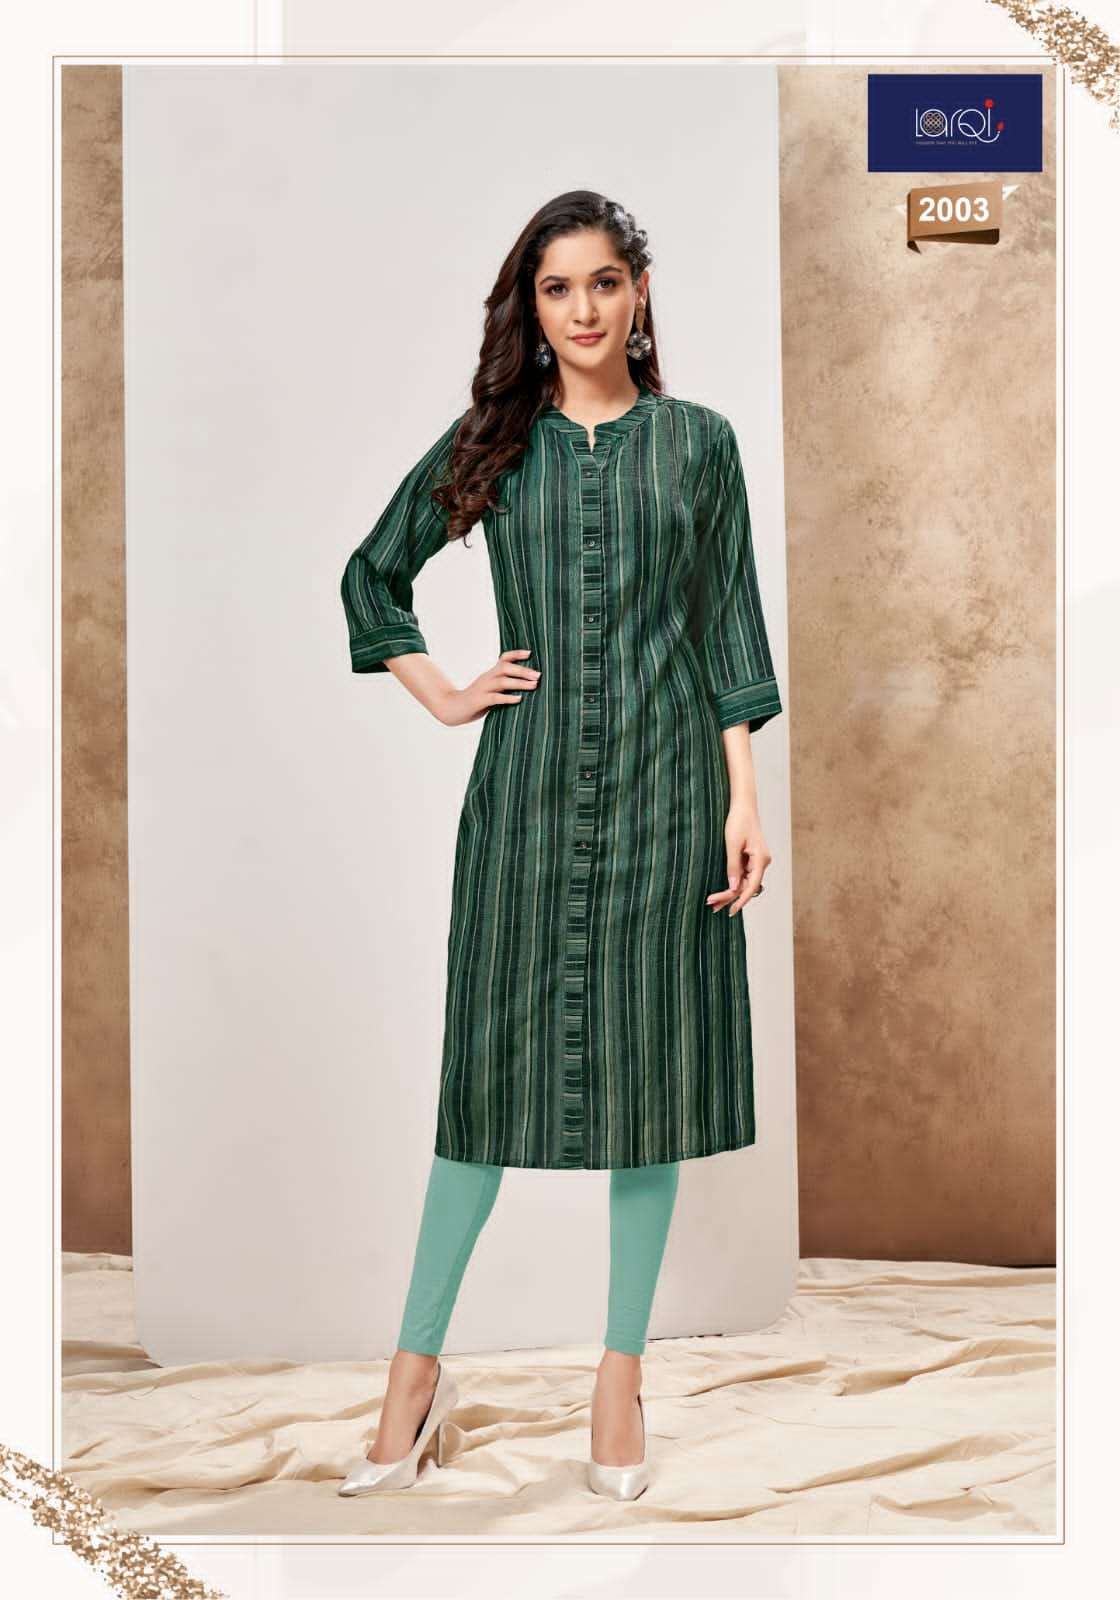 PAKIZA VOL-2 BY LARQI 2001 TO 2008 SERIES DESIGNER STYLISH FANCY COLORFUL BEAUTIFUL PARTY WEAR & ETHNIC WEAR COLLECTION RAYON WEAVING KURTIS AT WHOLESALE PRICE